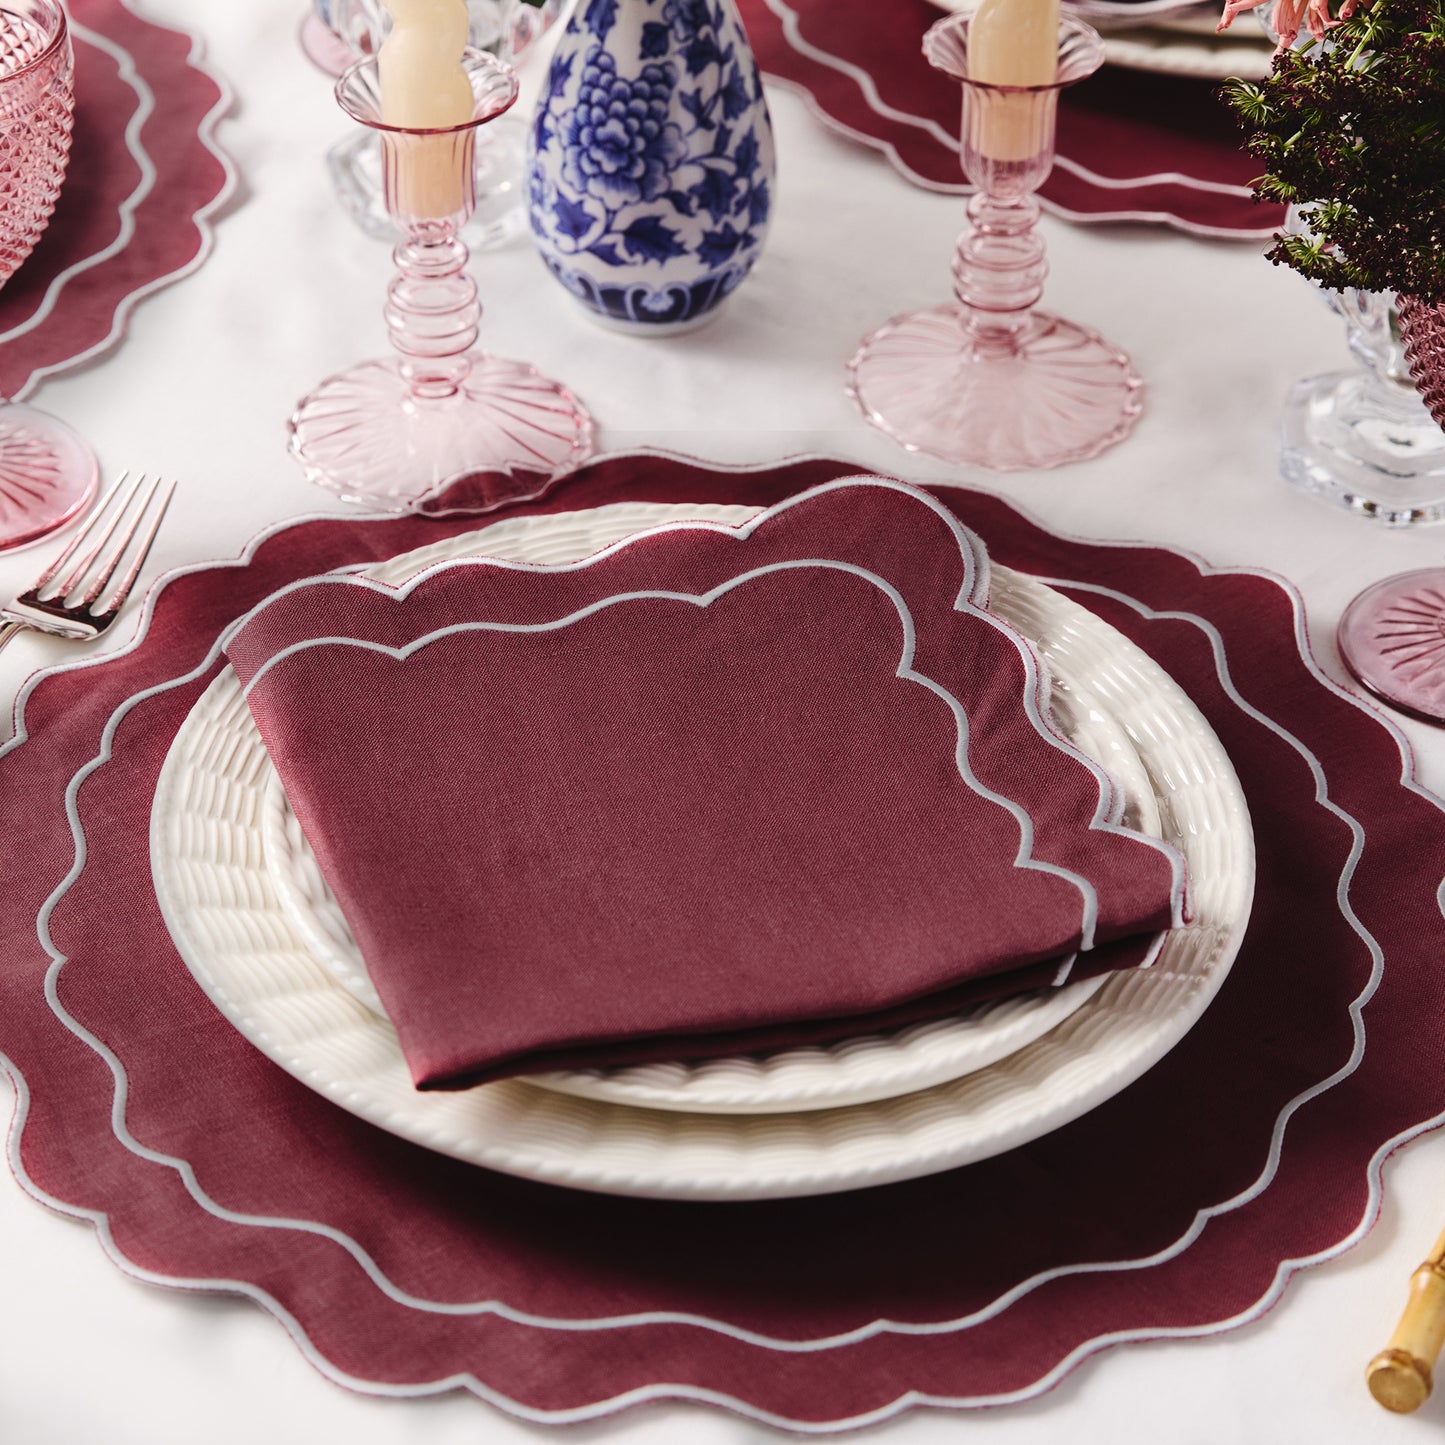 Set of 4 - Pure Linen Scalloped Edged Napkin - Cherry Red